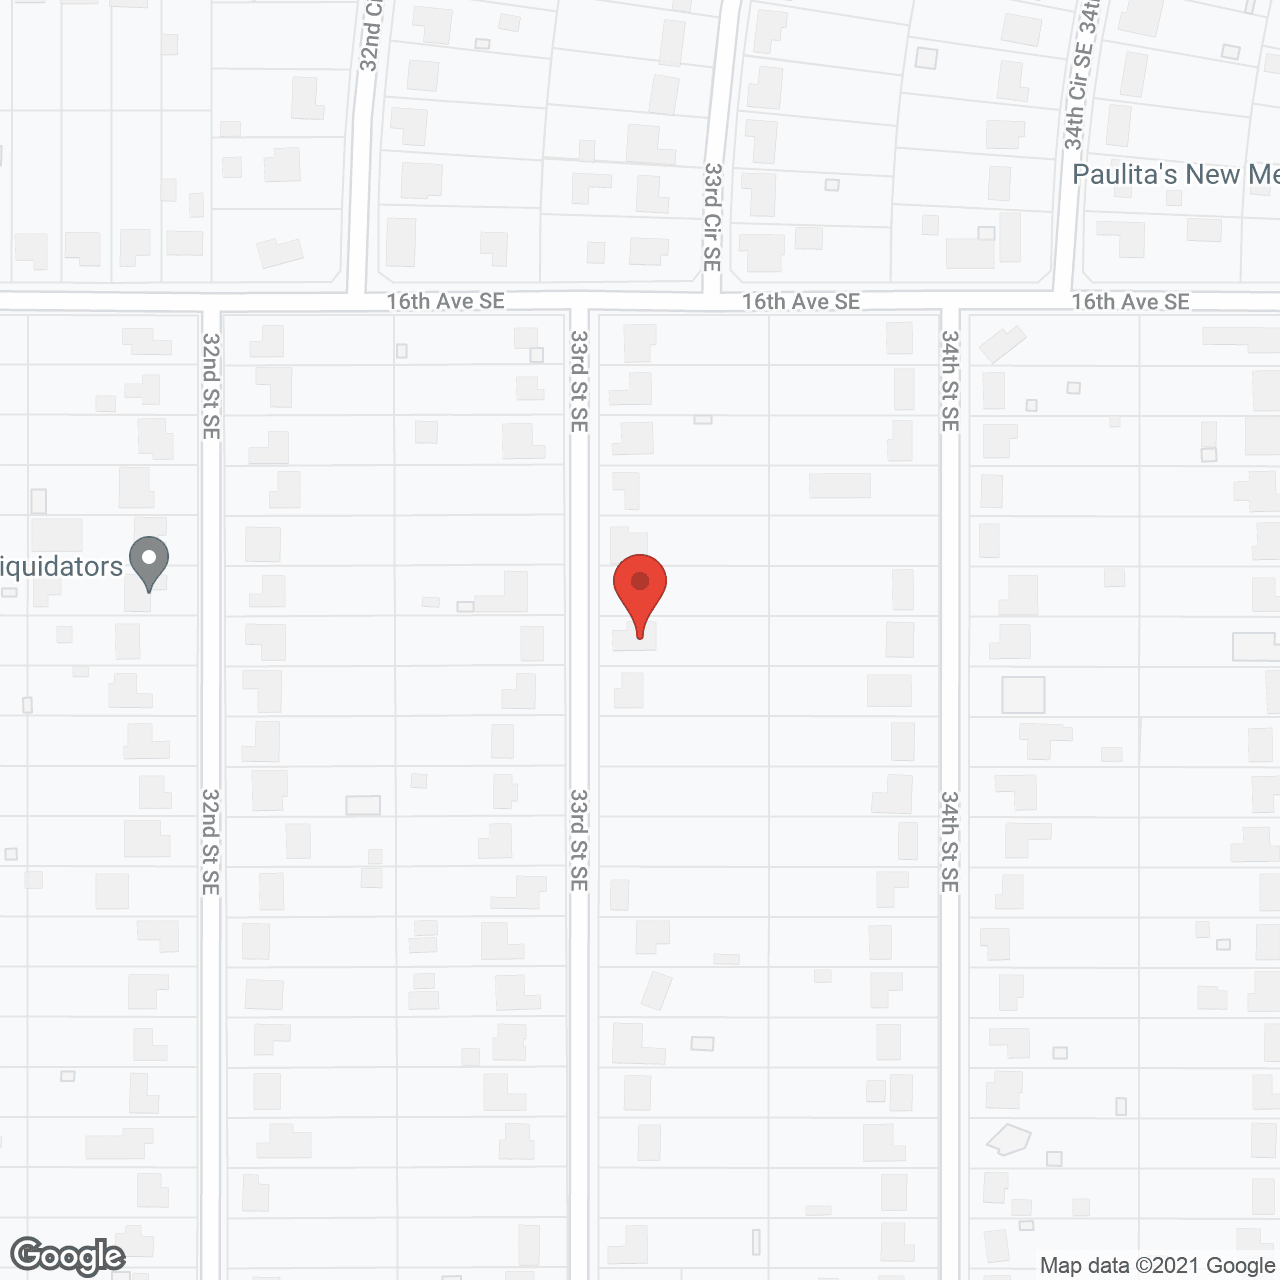 L.A. In-Home Care - 33rd Street in google map